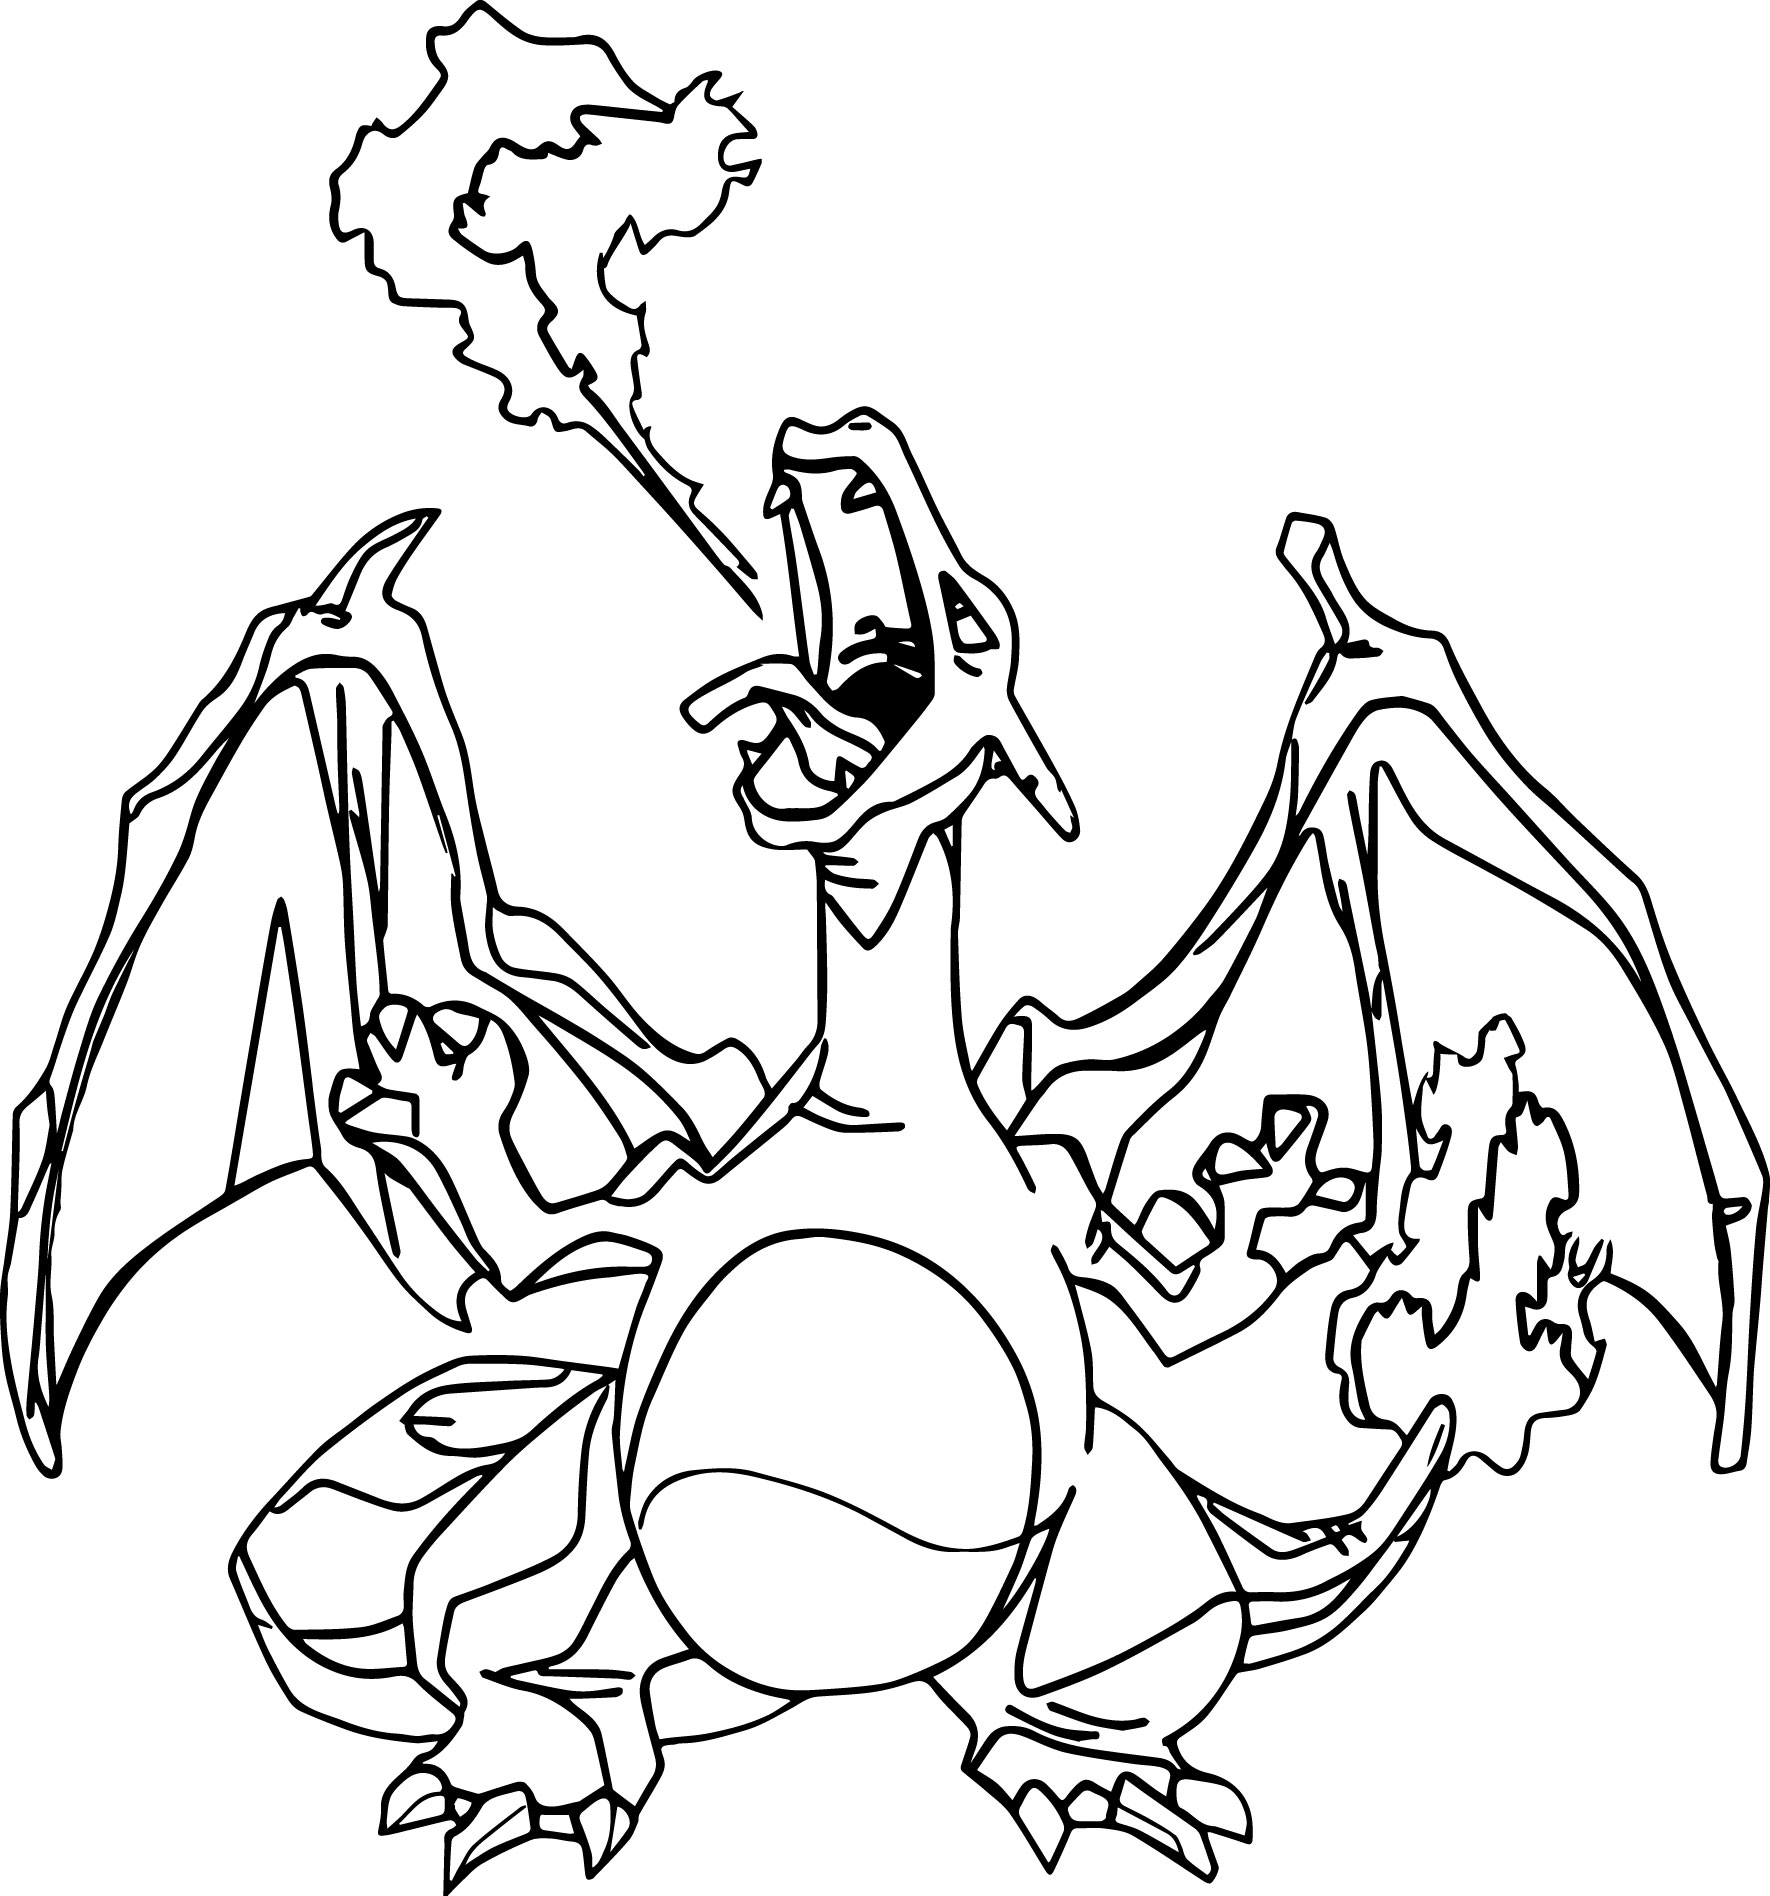 Pokemon Coloring Pages Mega Charizard X At Getcolorings.com | Free